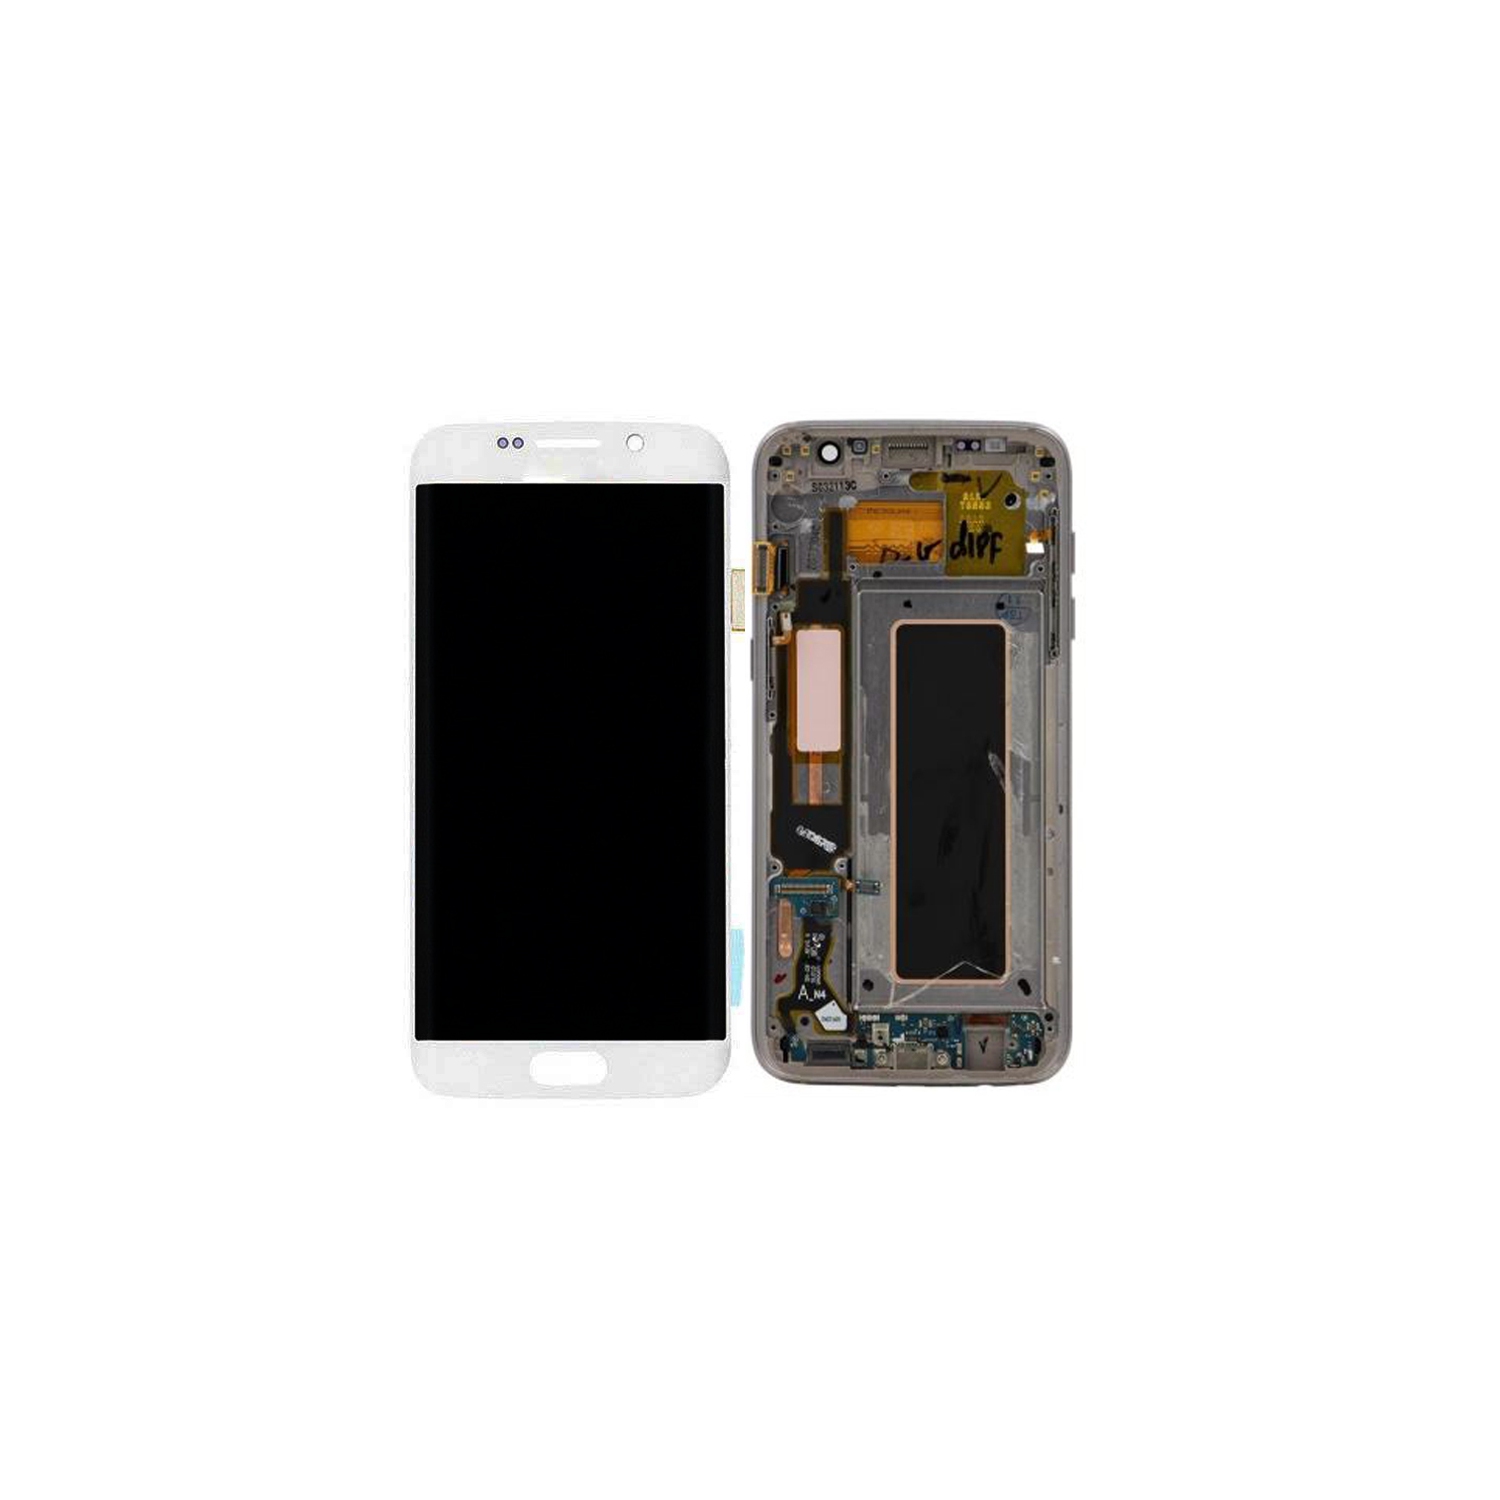 Samsung Galaxy S7 Edge G935W8 LCD Digitizer Assembly Replacement With Frame - White